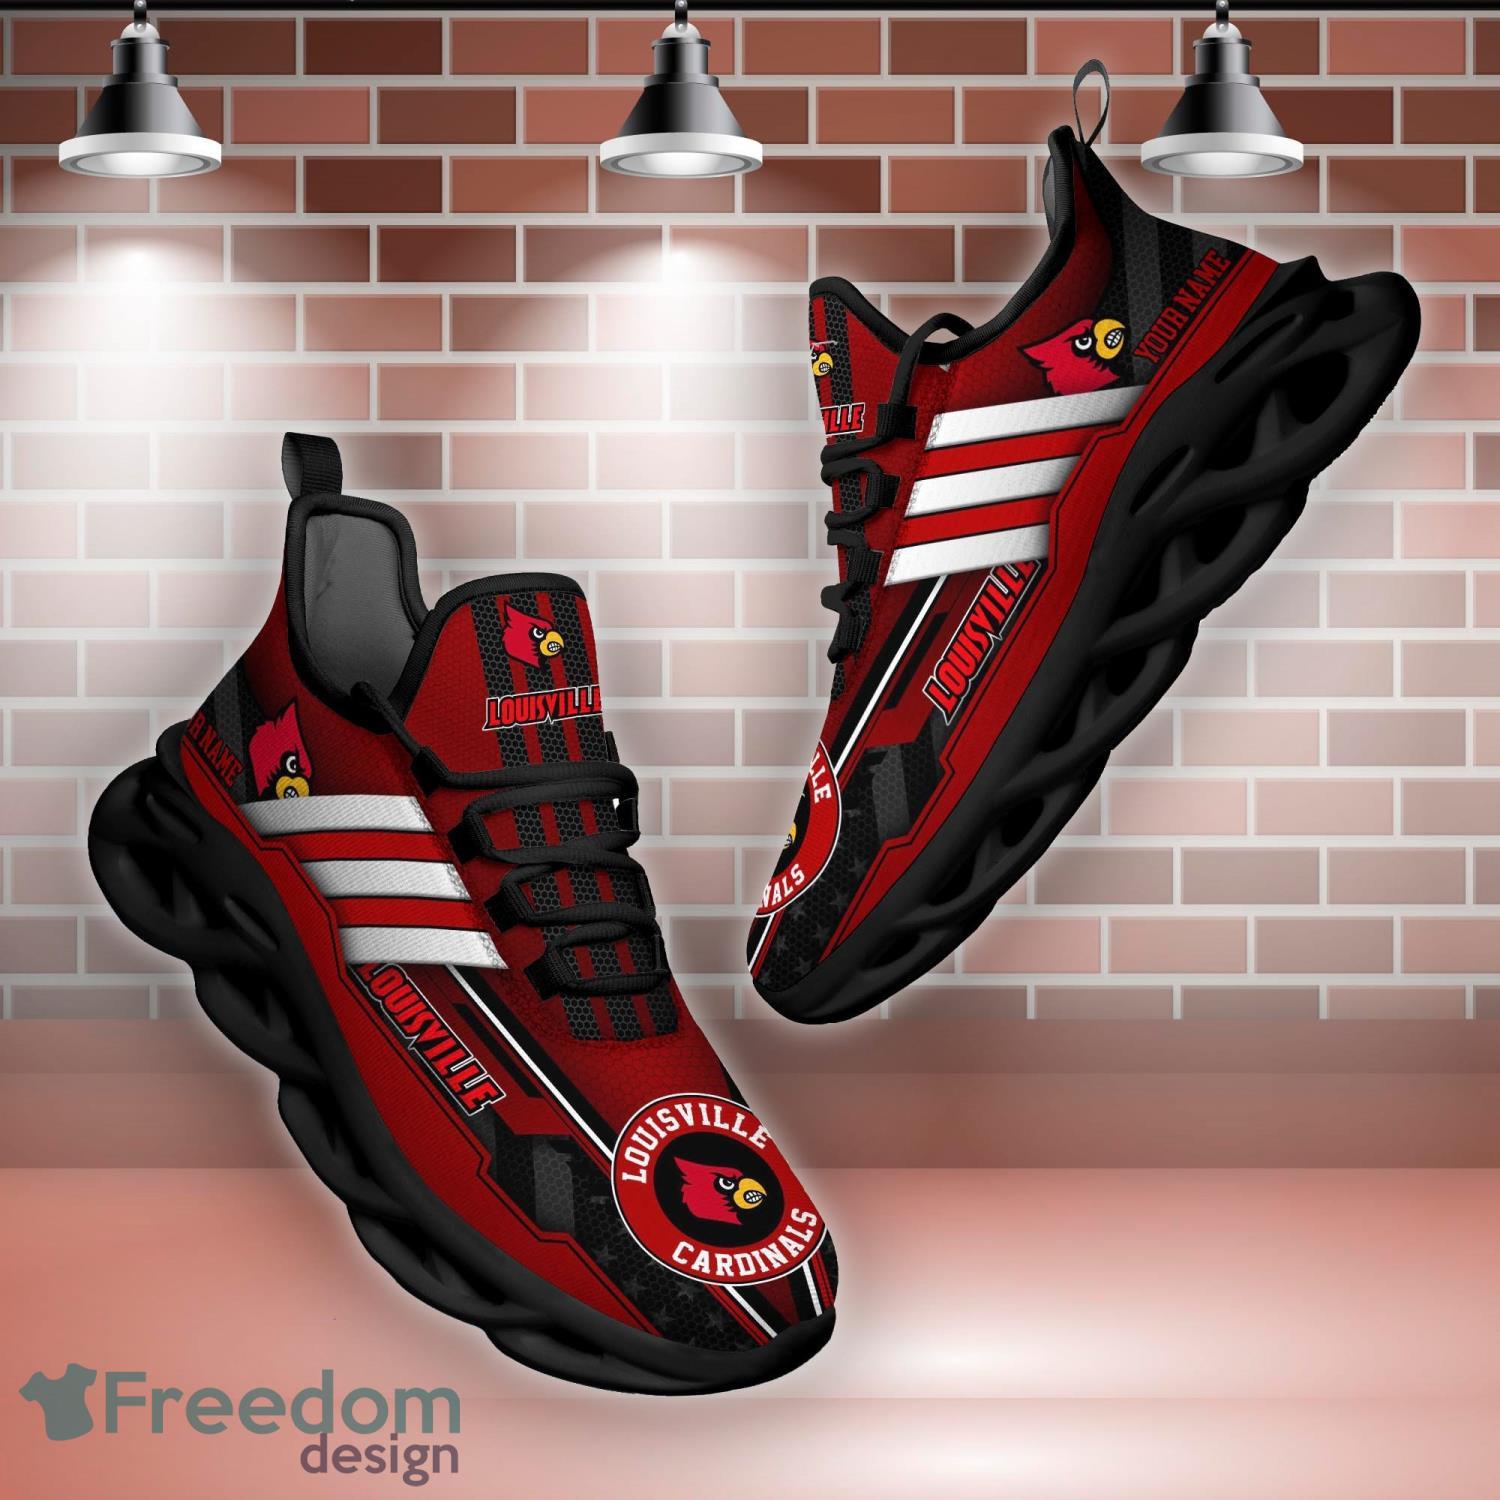 louisville adidas shoes